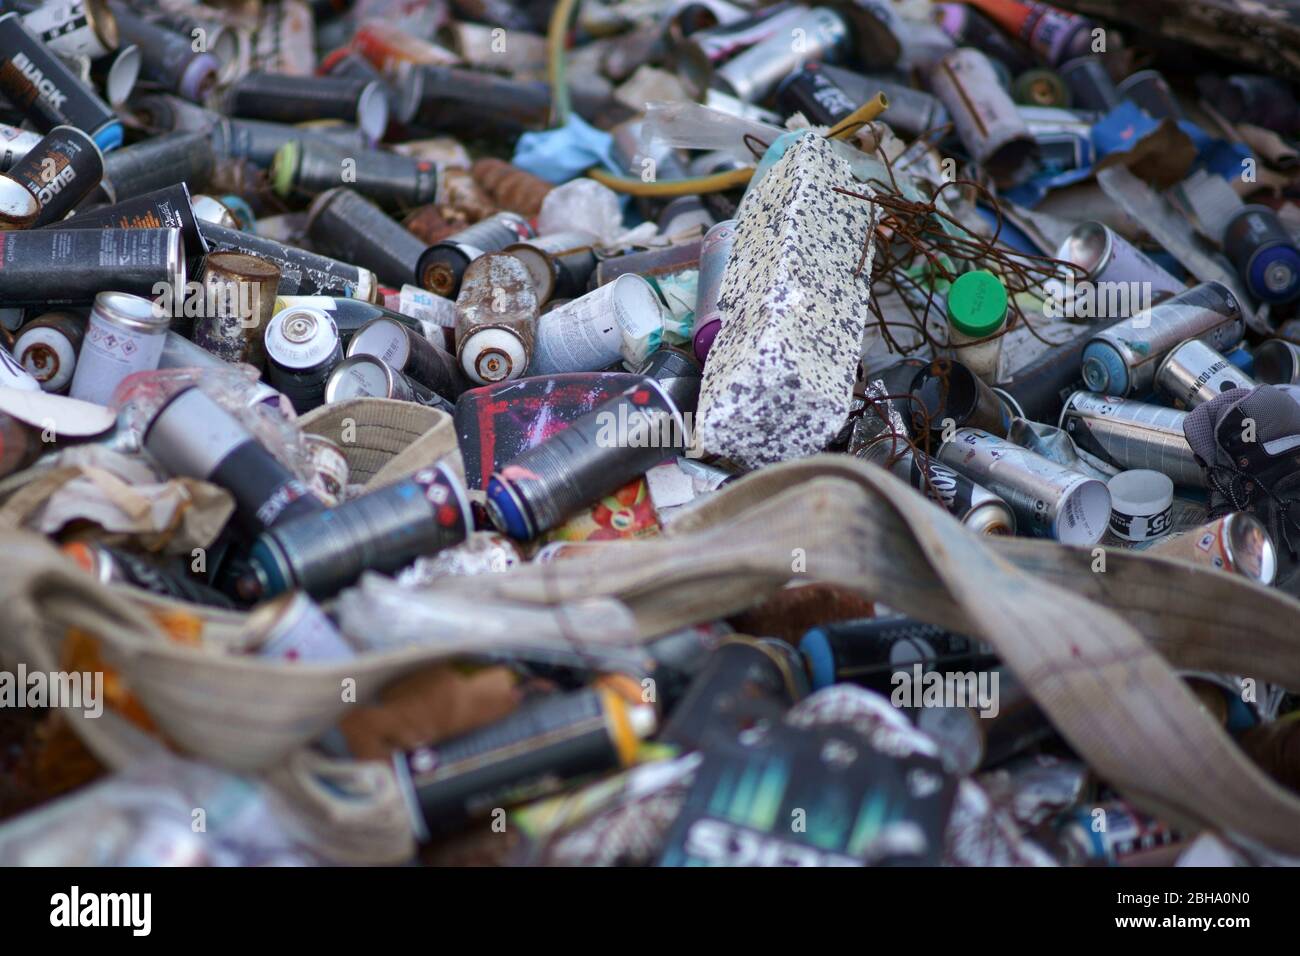 Empty spray cans of graffiti sprayers lie carelessly stacked on top of each other. Stock Photo